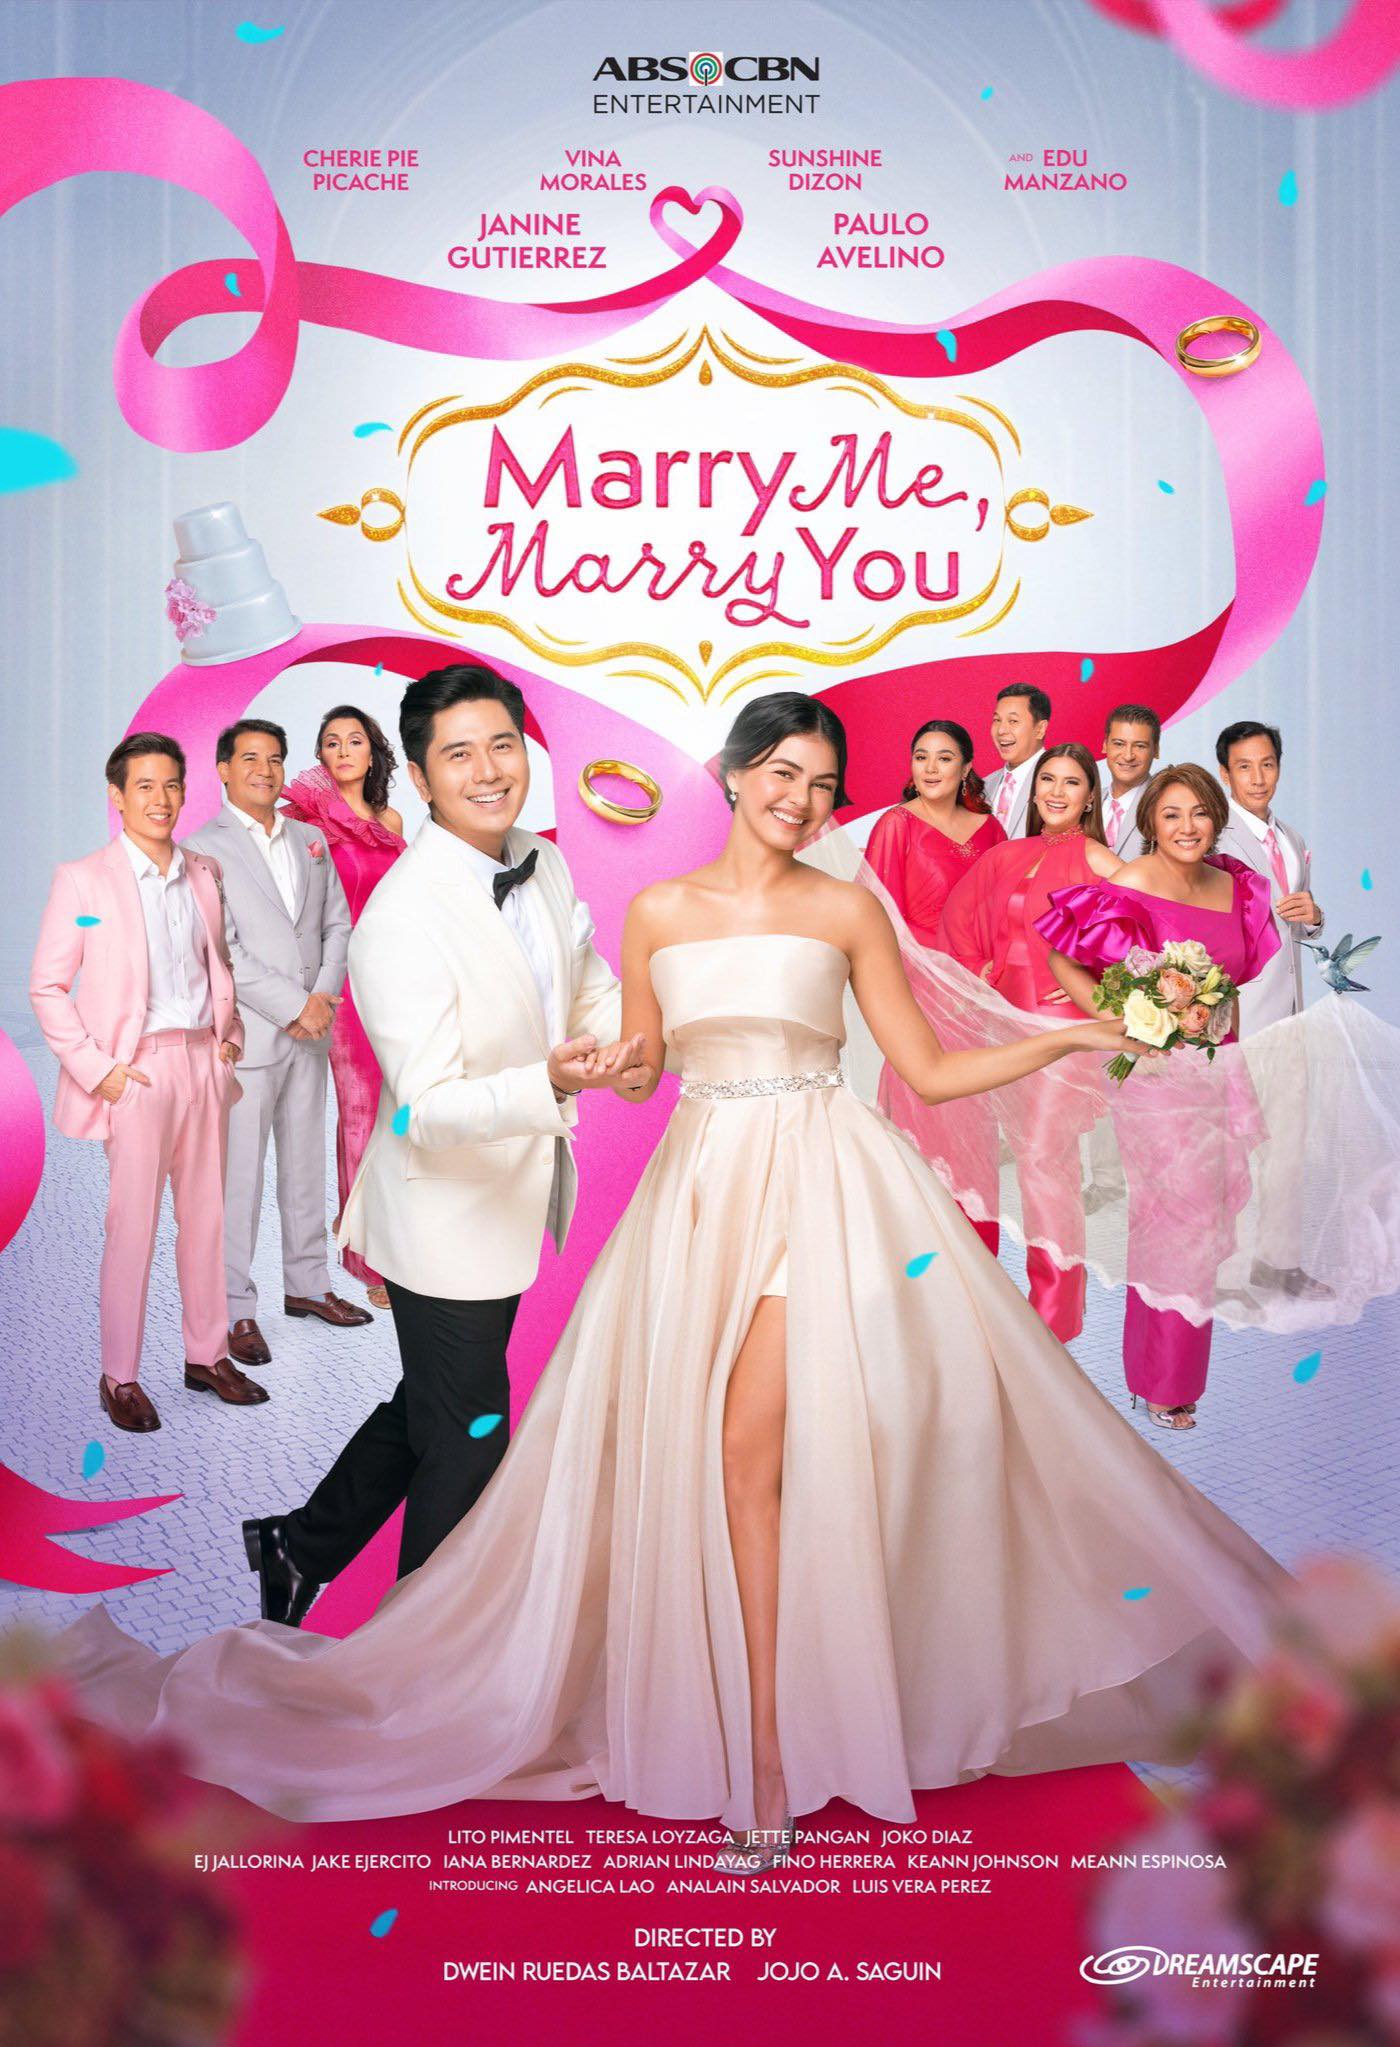 Marry Me, Marry You official poster